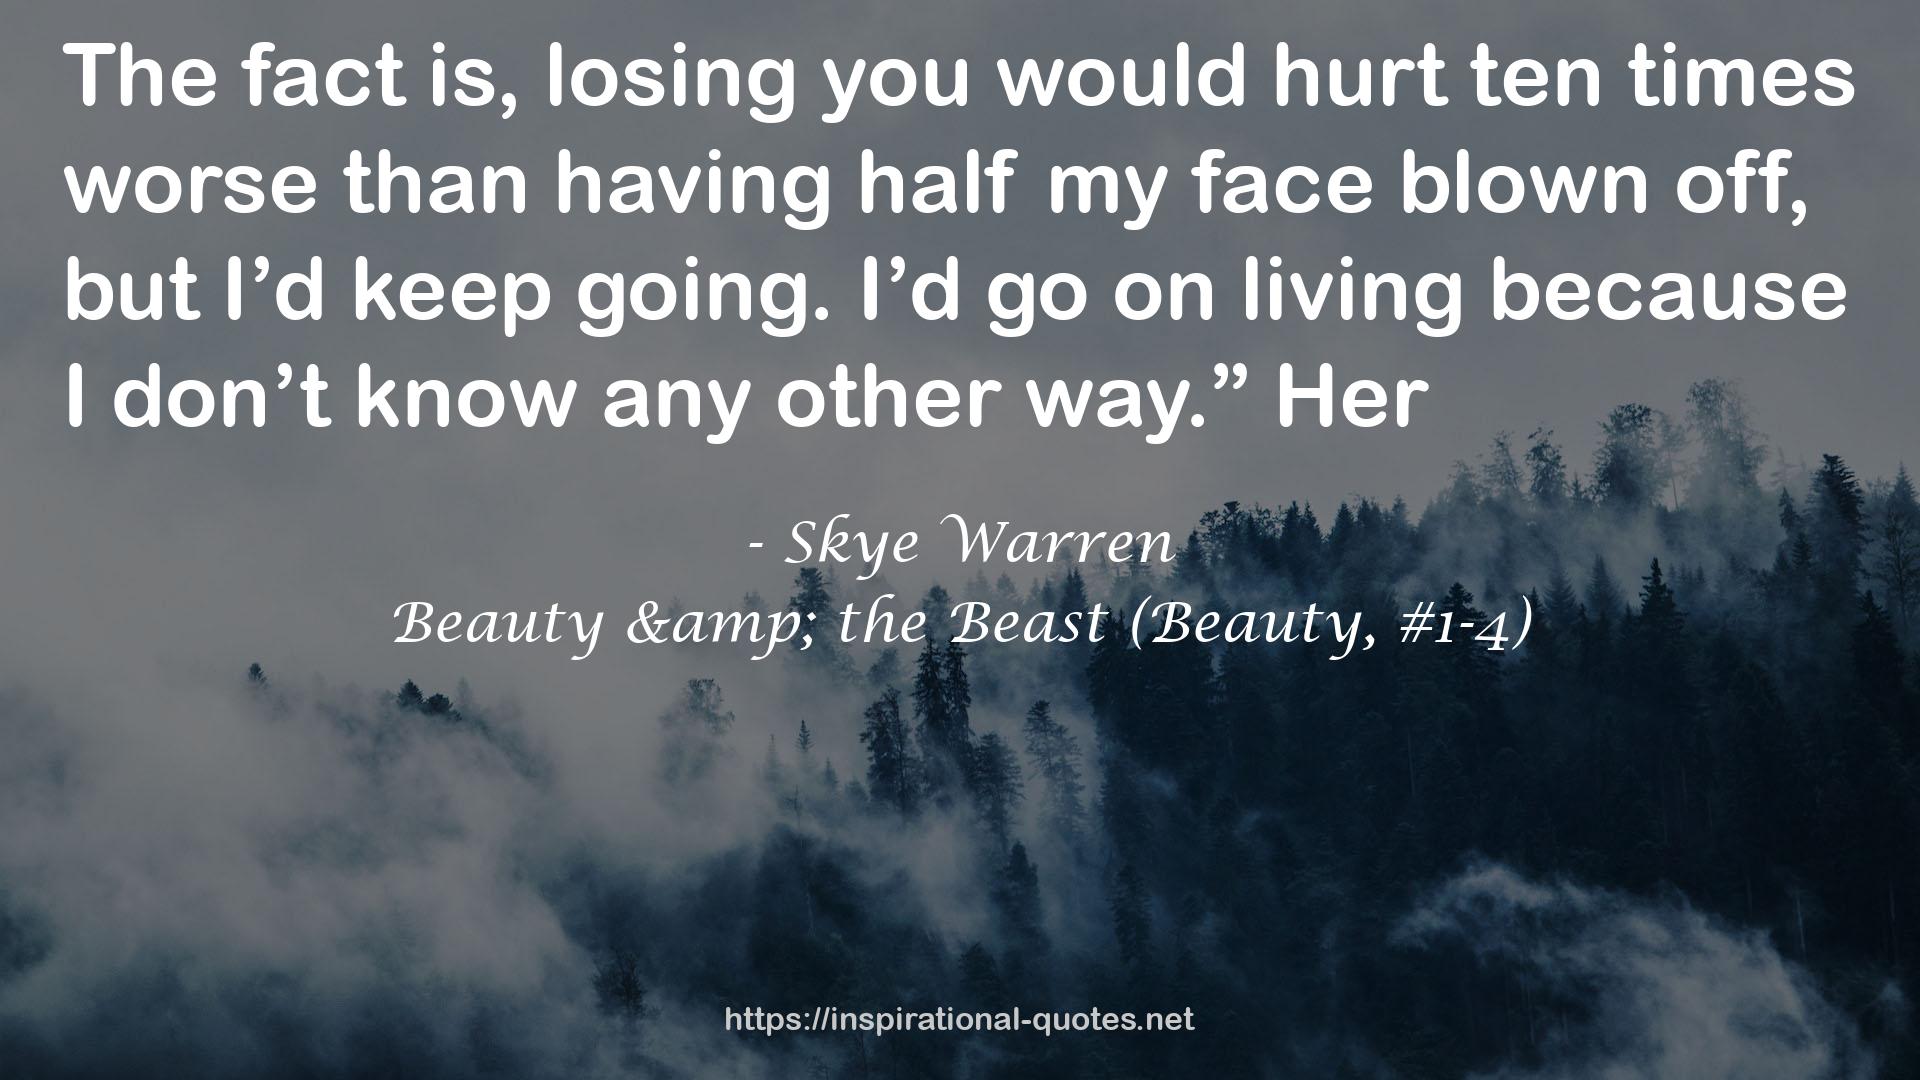 Beauty & the Beast (Beauty, #1-4) QUOTES